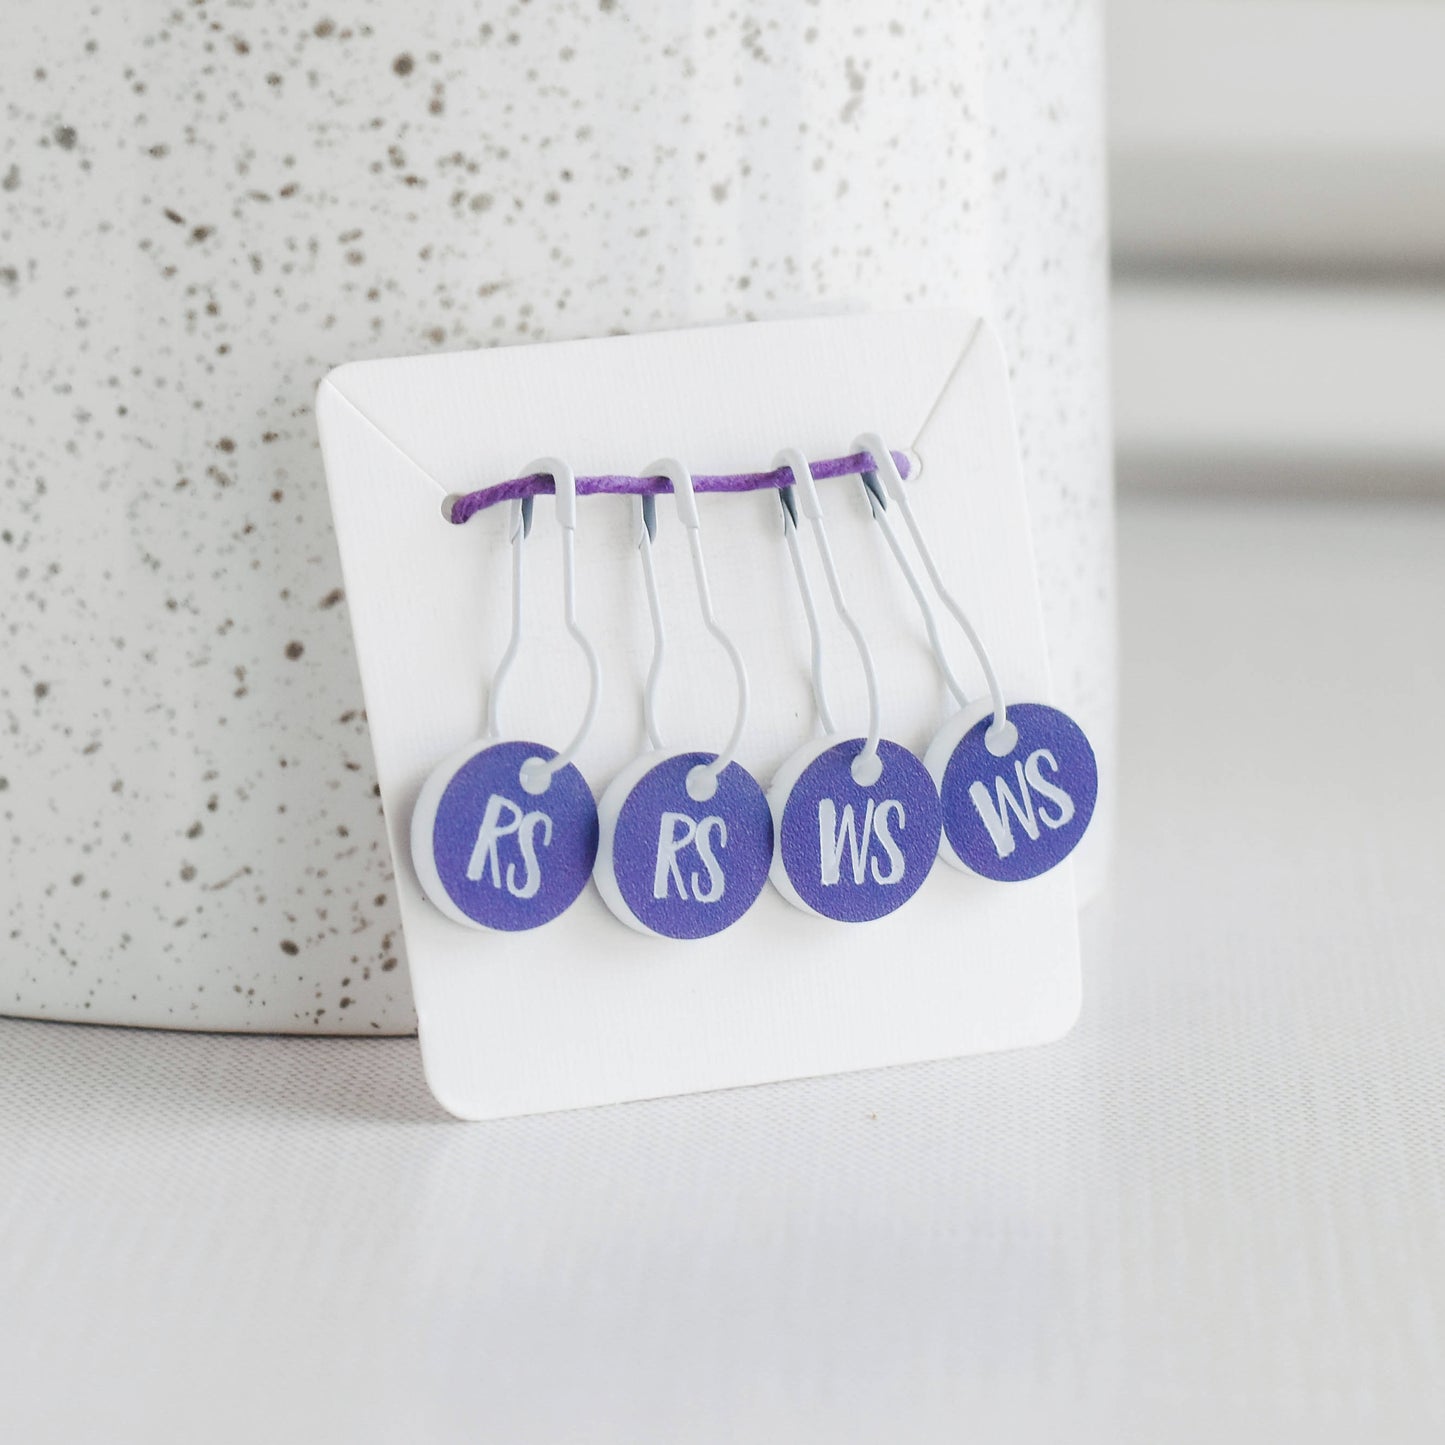 Set of 4 Laser Engraved Removable Stitch Markers - RS and WS - Purple